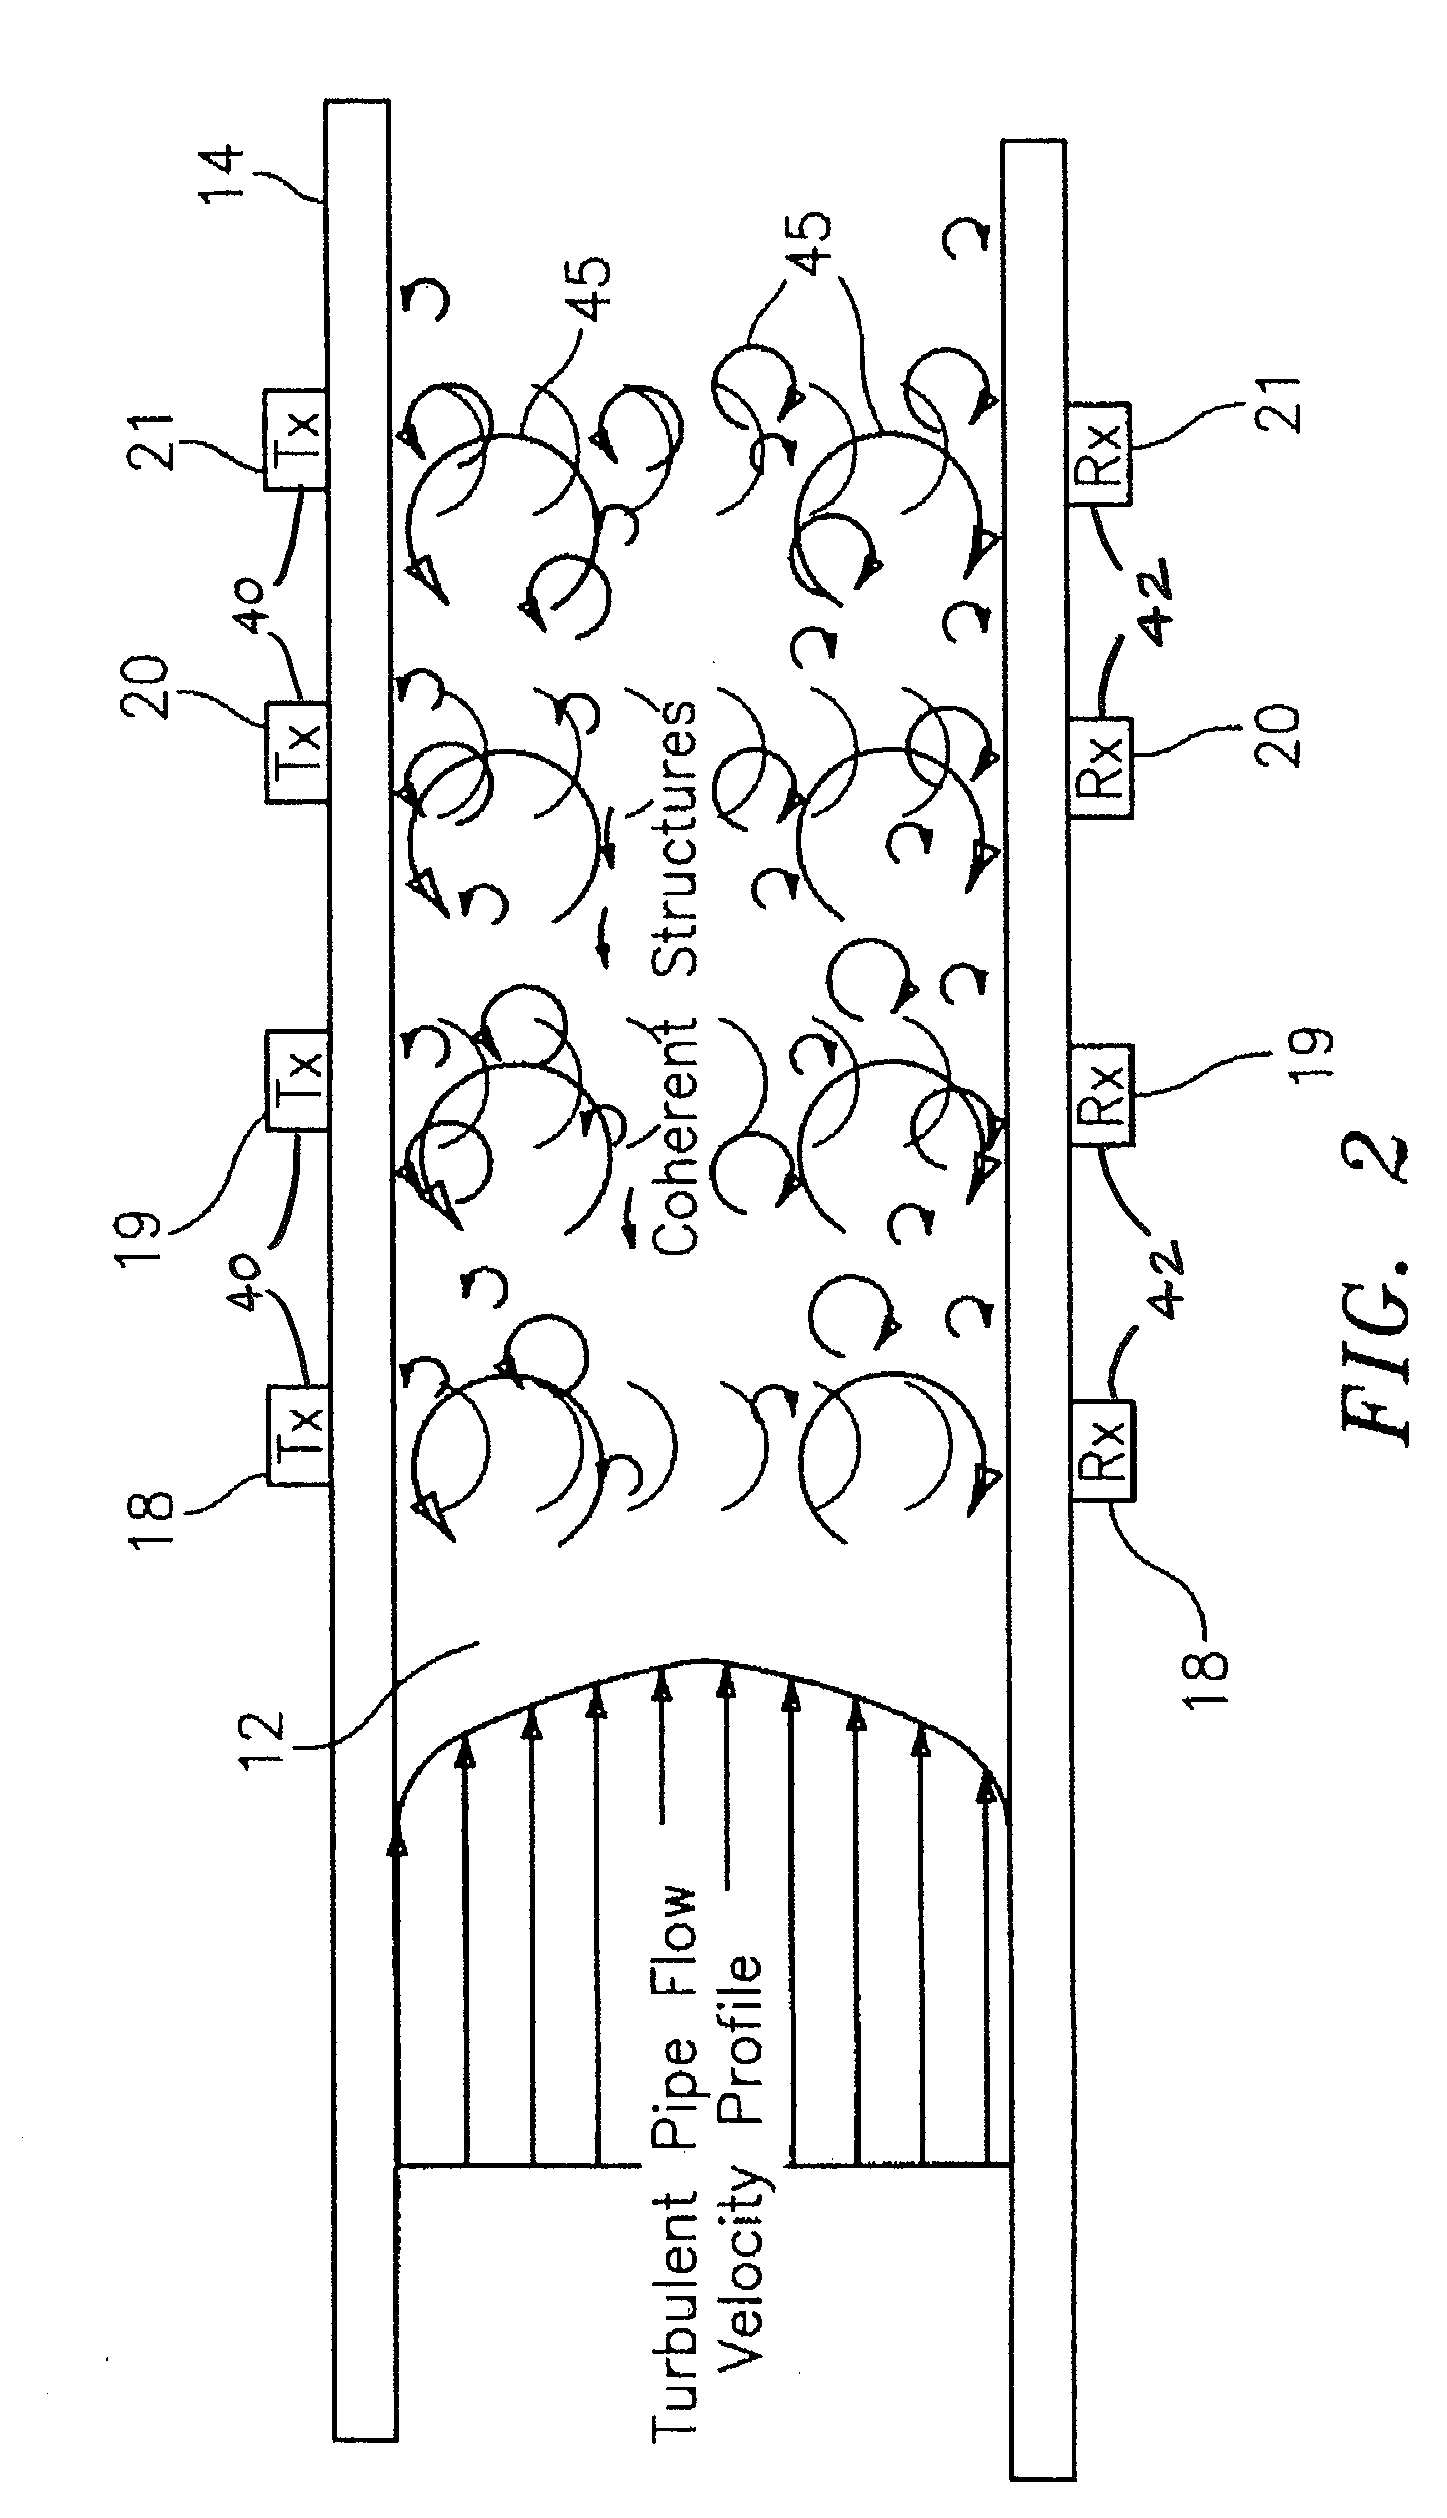 Apparatus And Method of Lensing An Ultrasonic Beam For An Ultrasonic Flow Meter